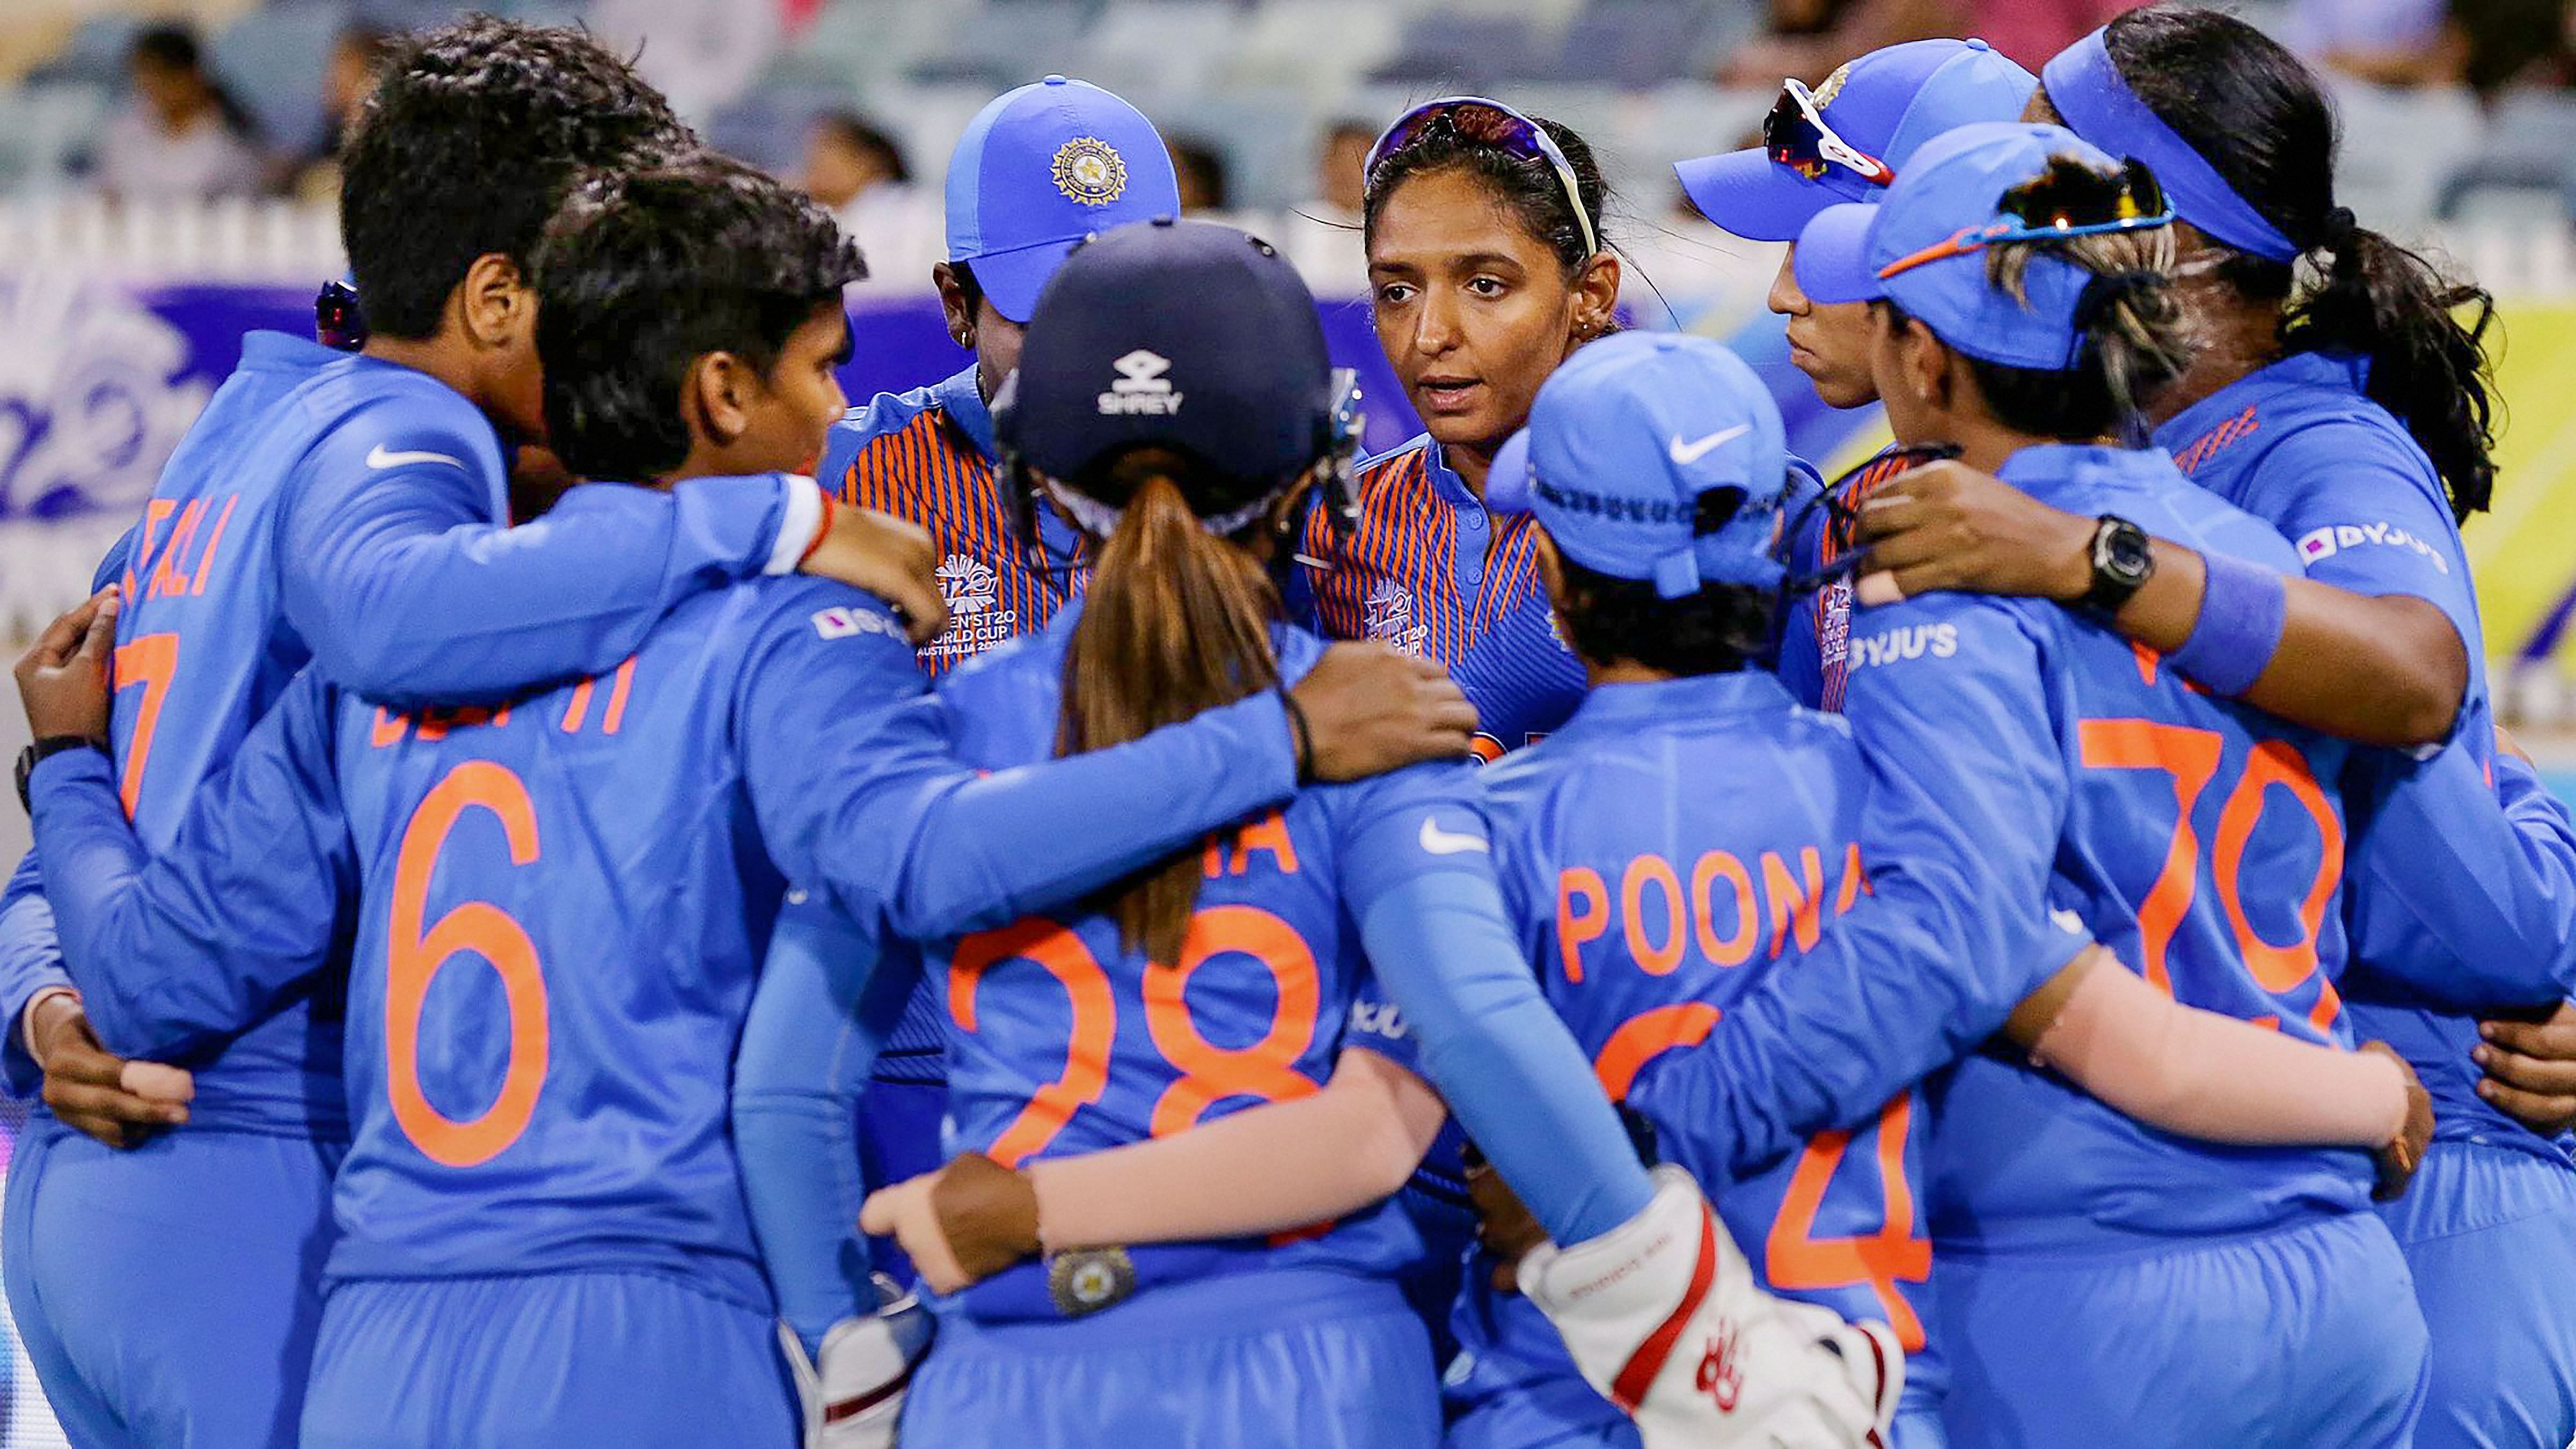  Indian Women's cricket team captain Harmanpreet Kaur speaks to the huddle during the ICC Women's T20 Cricket World Cup match. (PTI Photo)